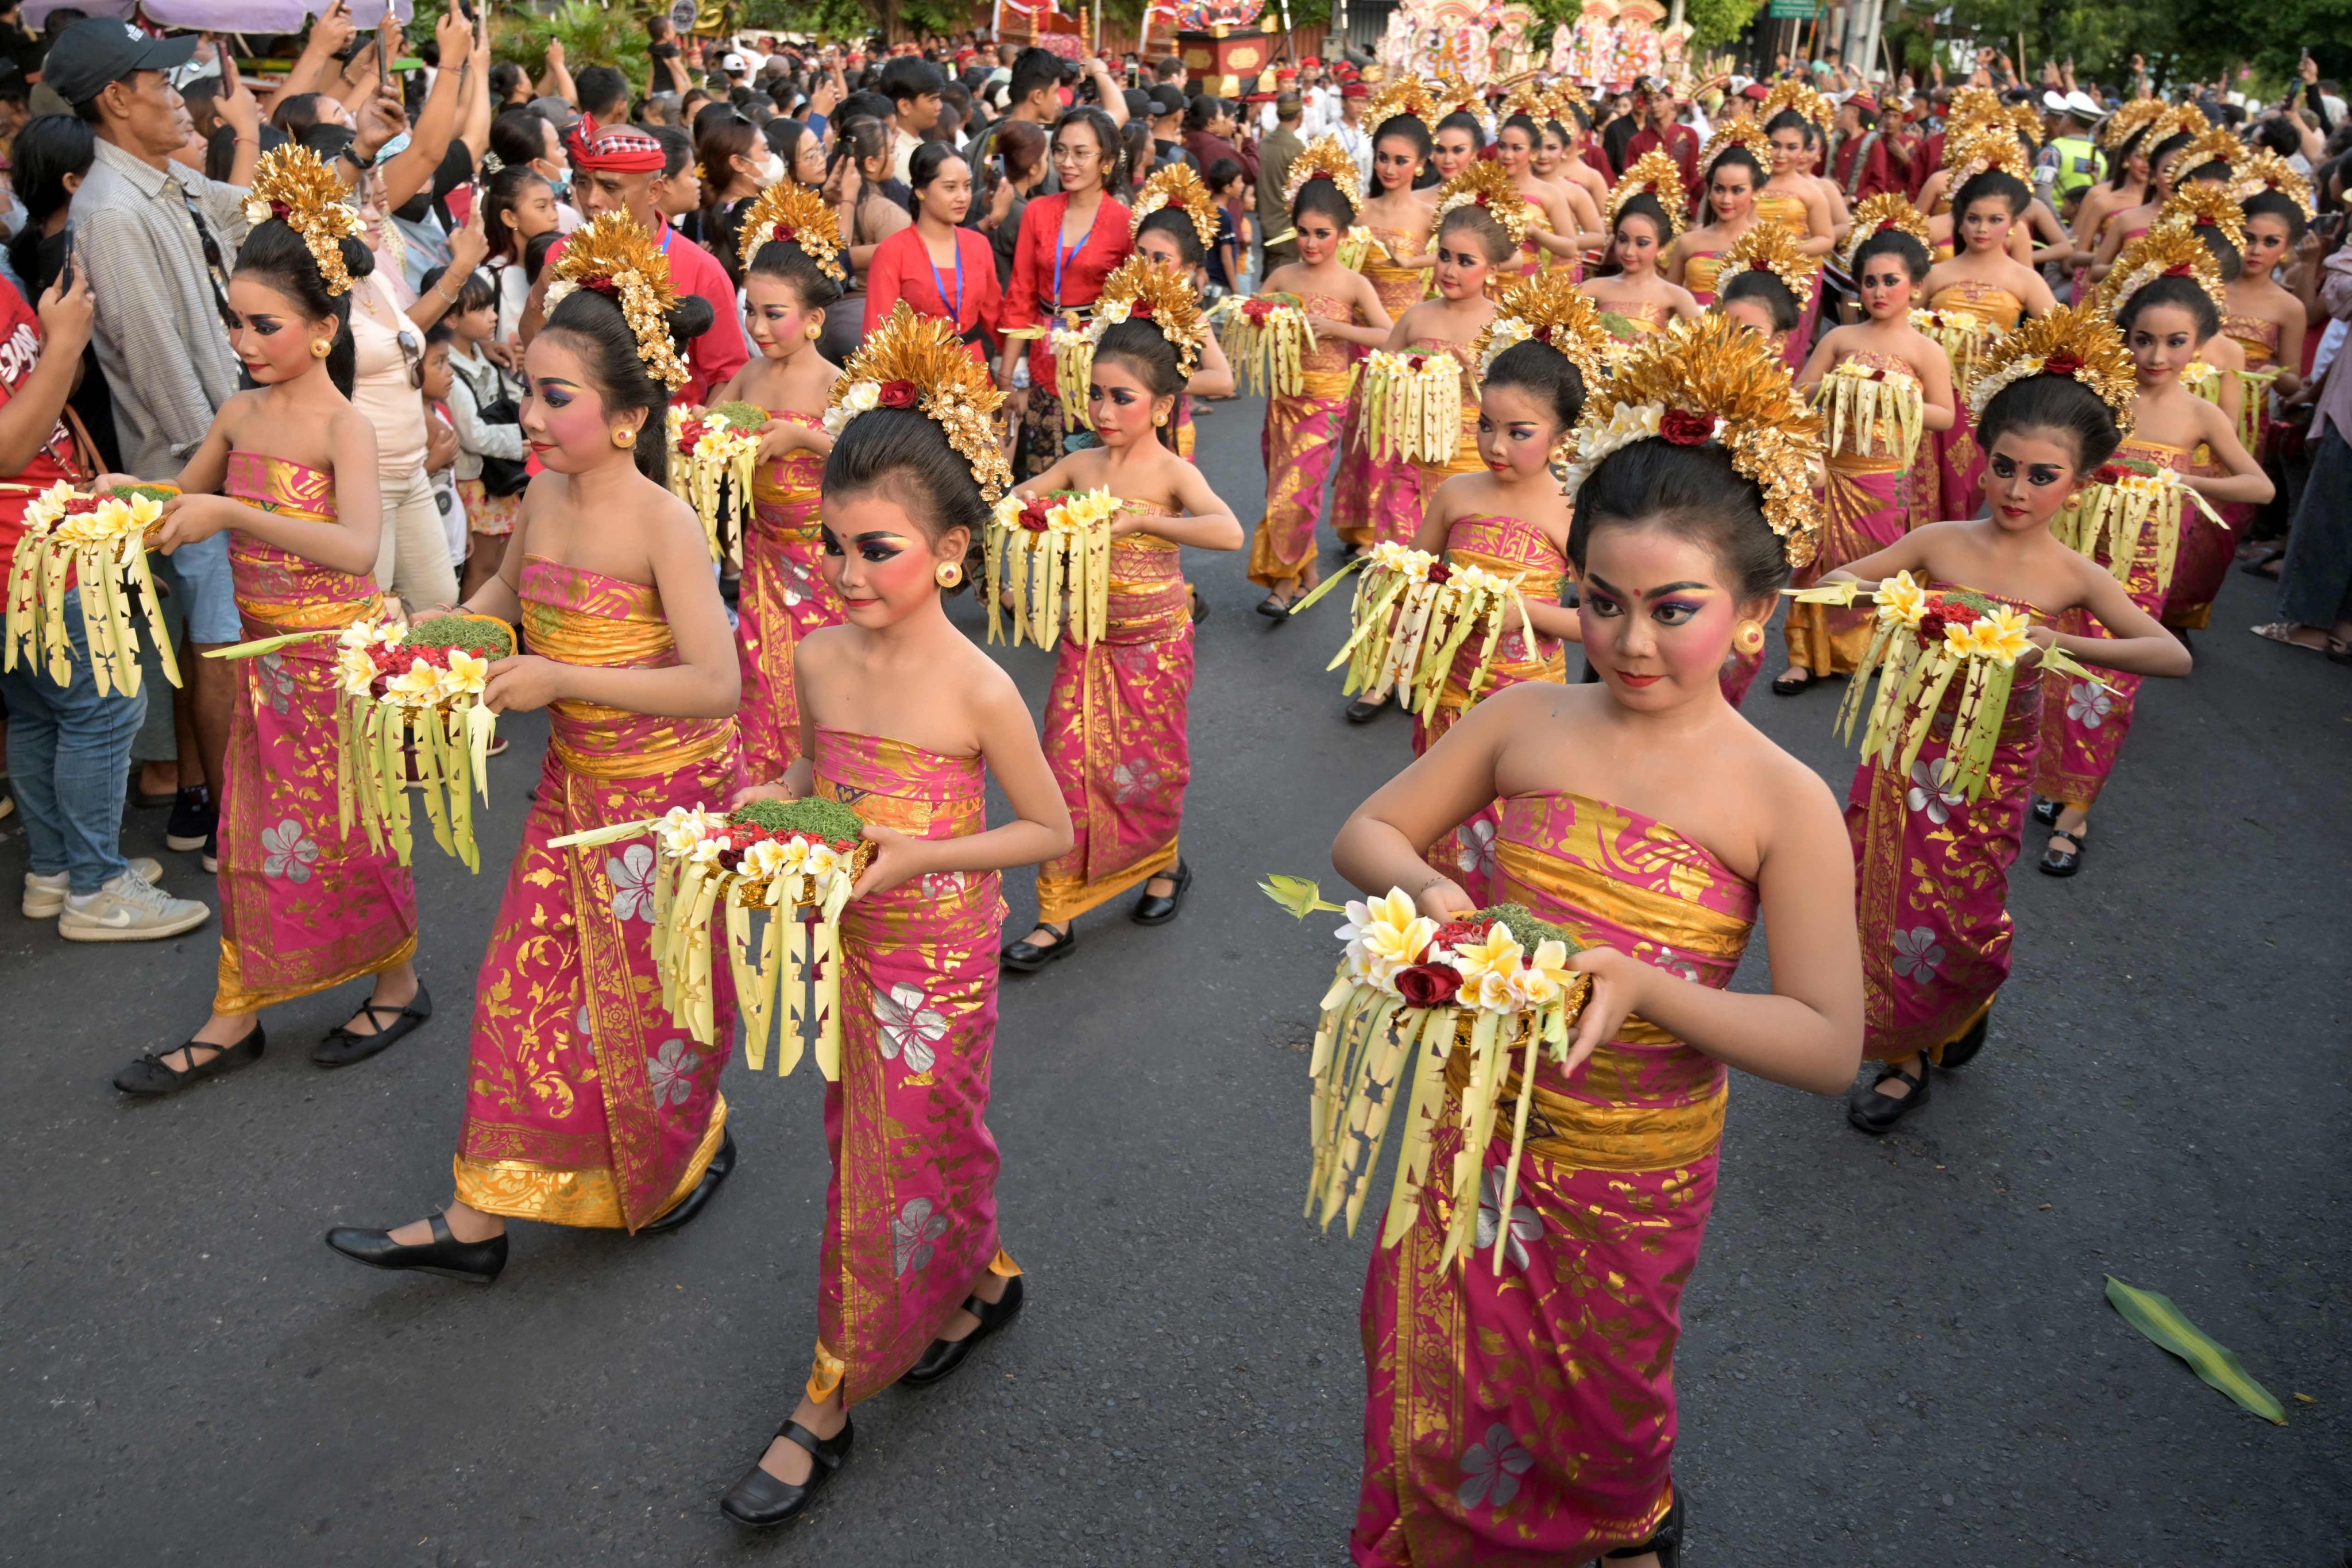 Balinese children perform a traditional dance during a parade at the Bali Art Festival in Denpasar on June 15. Photo: AFP